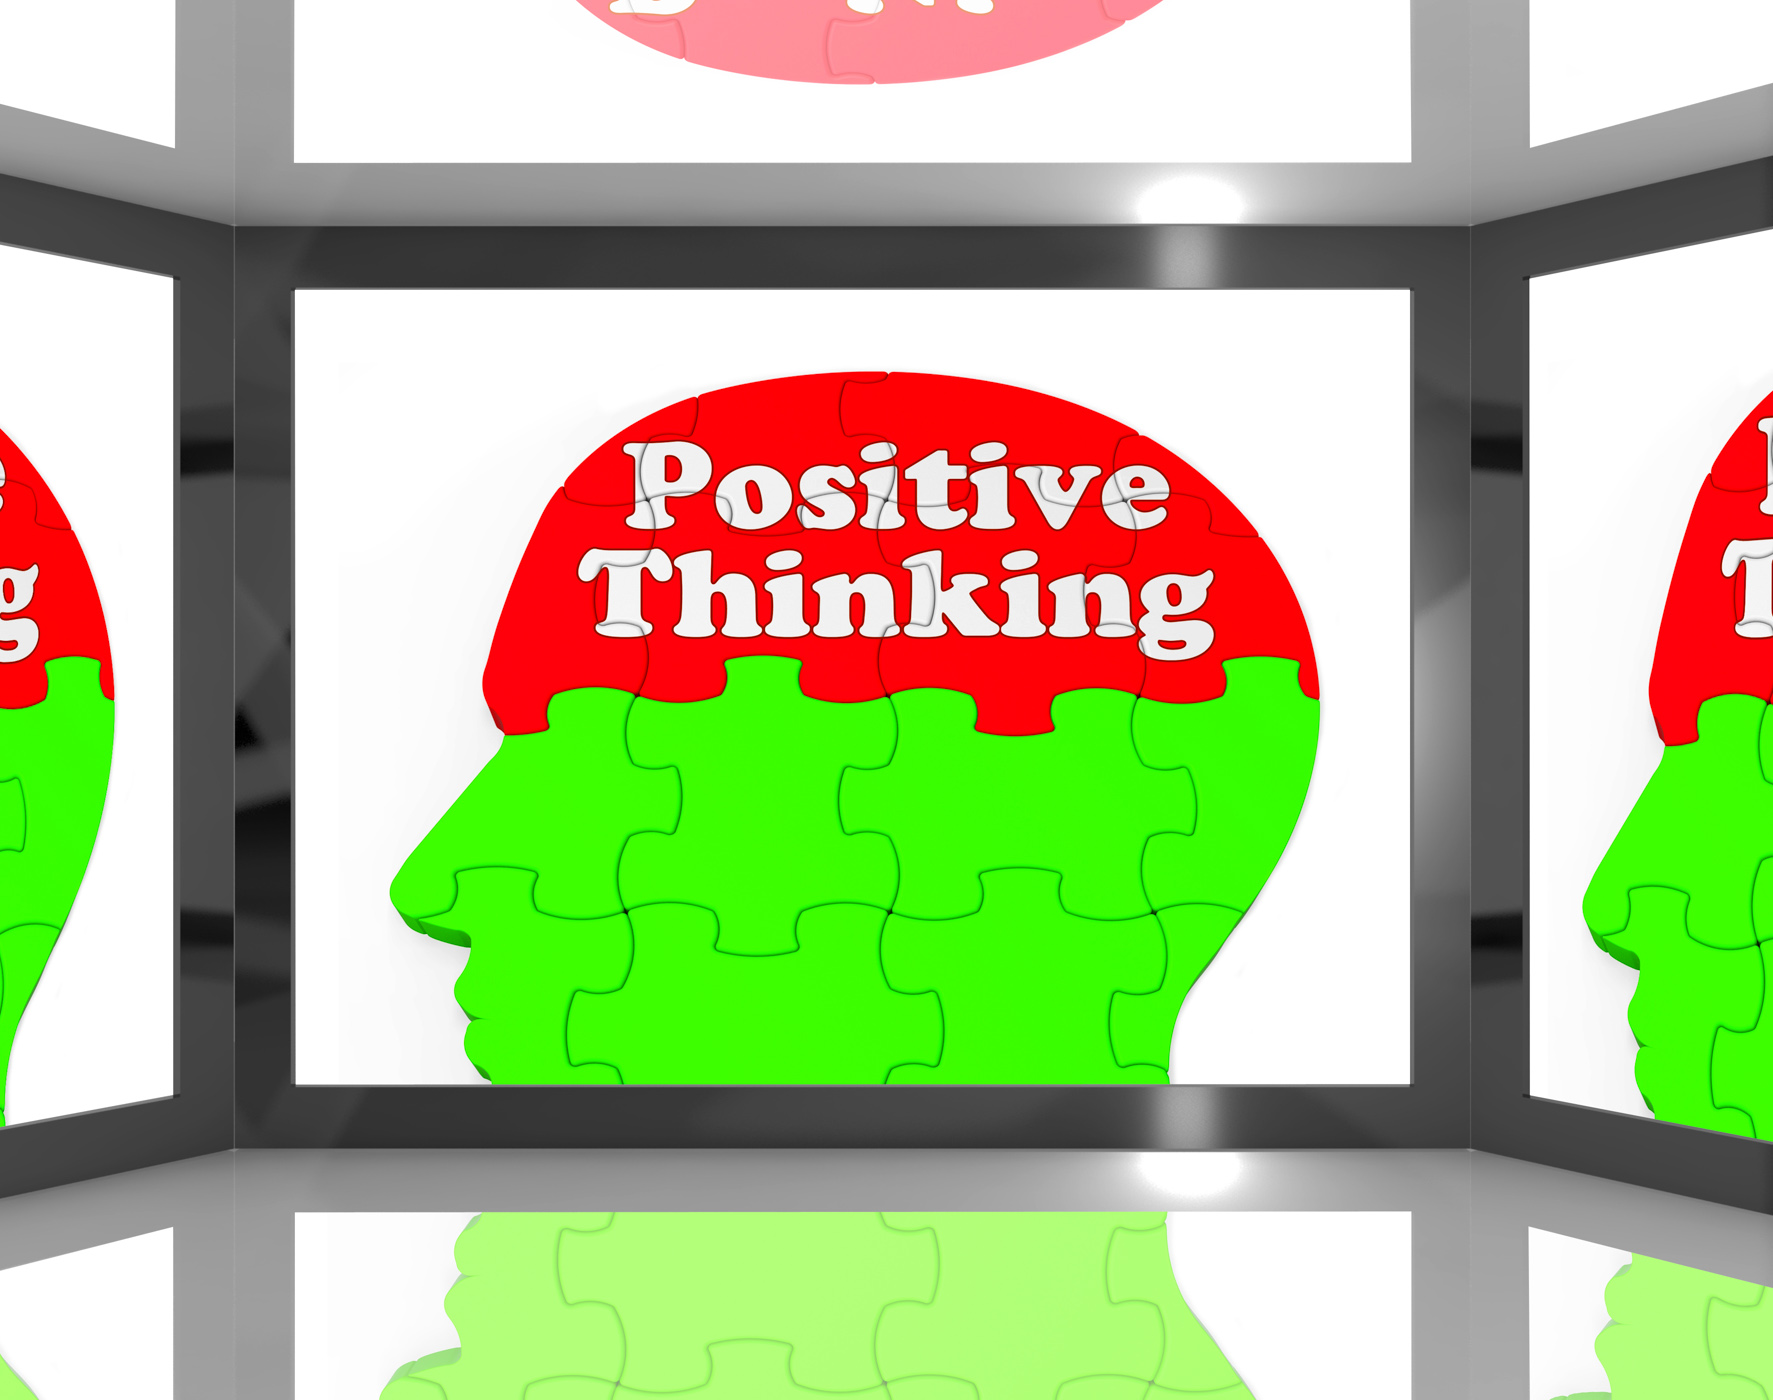 Positive thinking on screen shows interactive tv shows photo